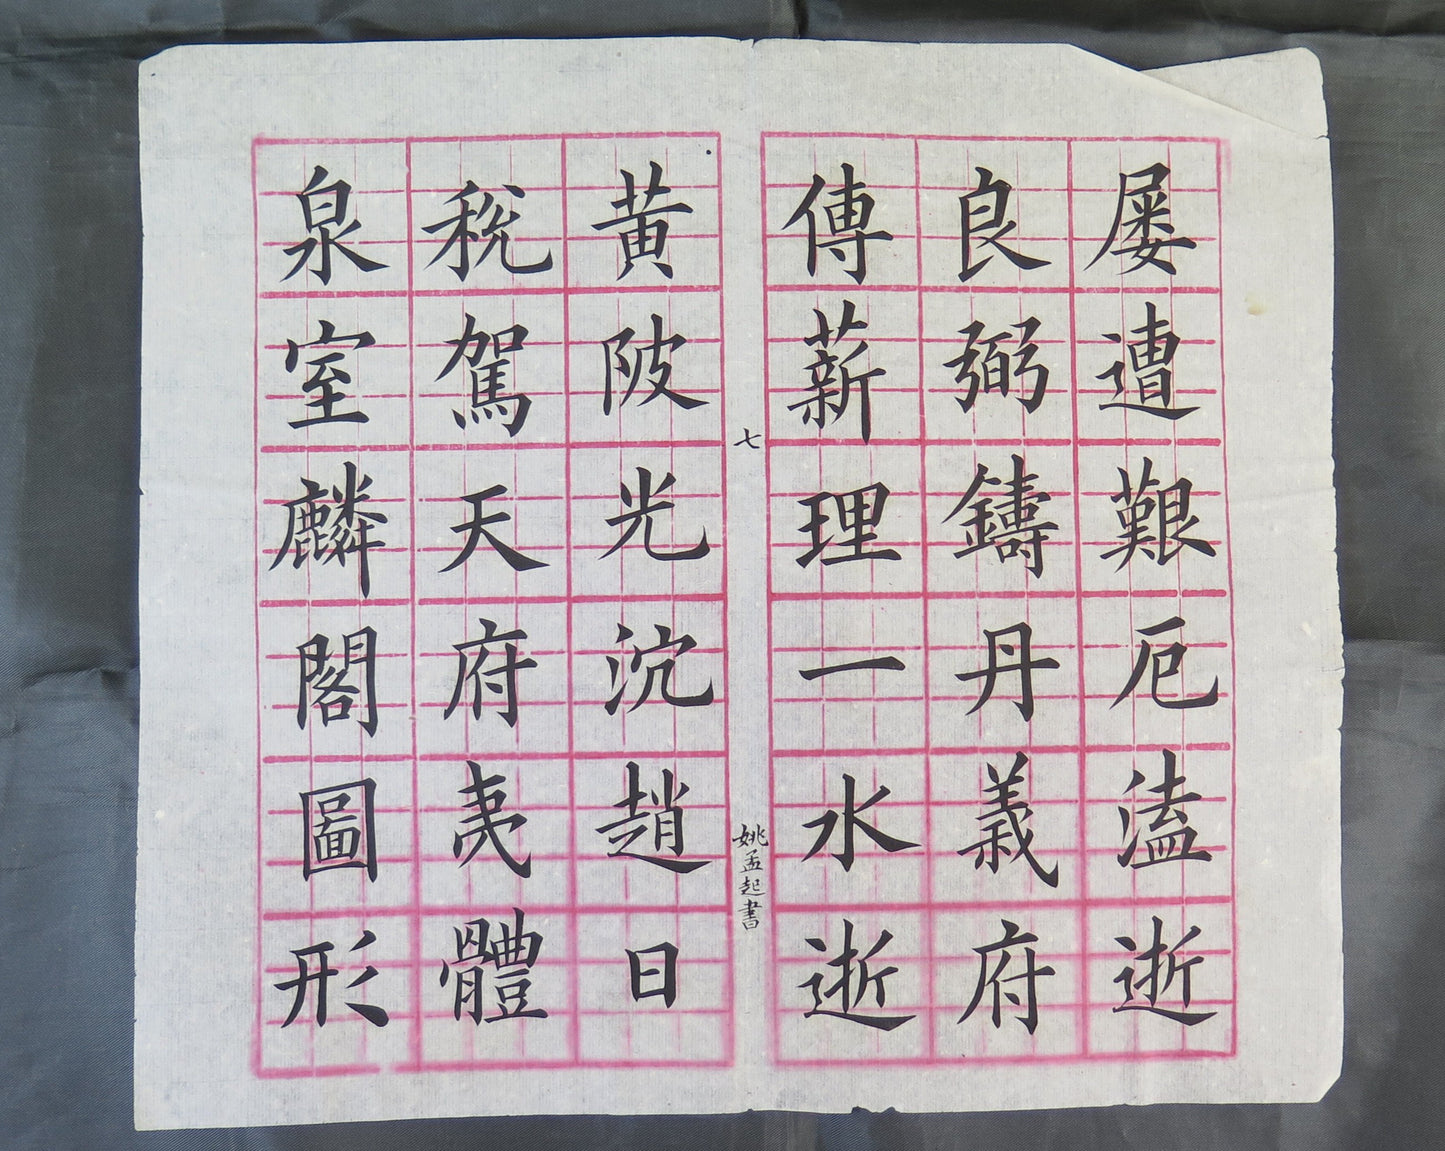 12 SHEETS CHINESE CALLIGRAPHY CHINA IDEOGRAMS VINTAGE ALPHABET CHARACTERS BM53.5G